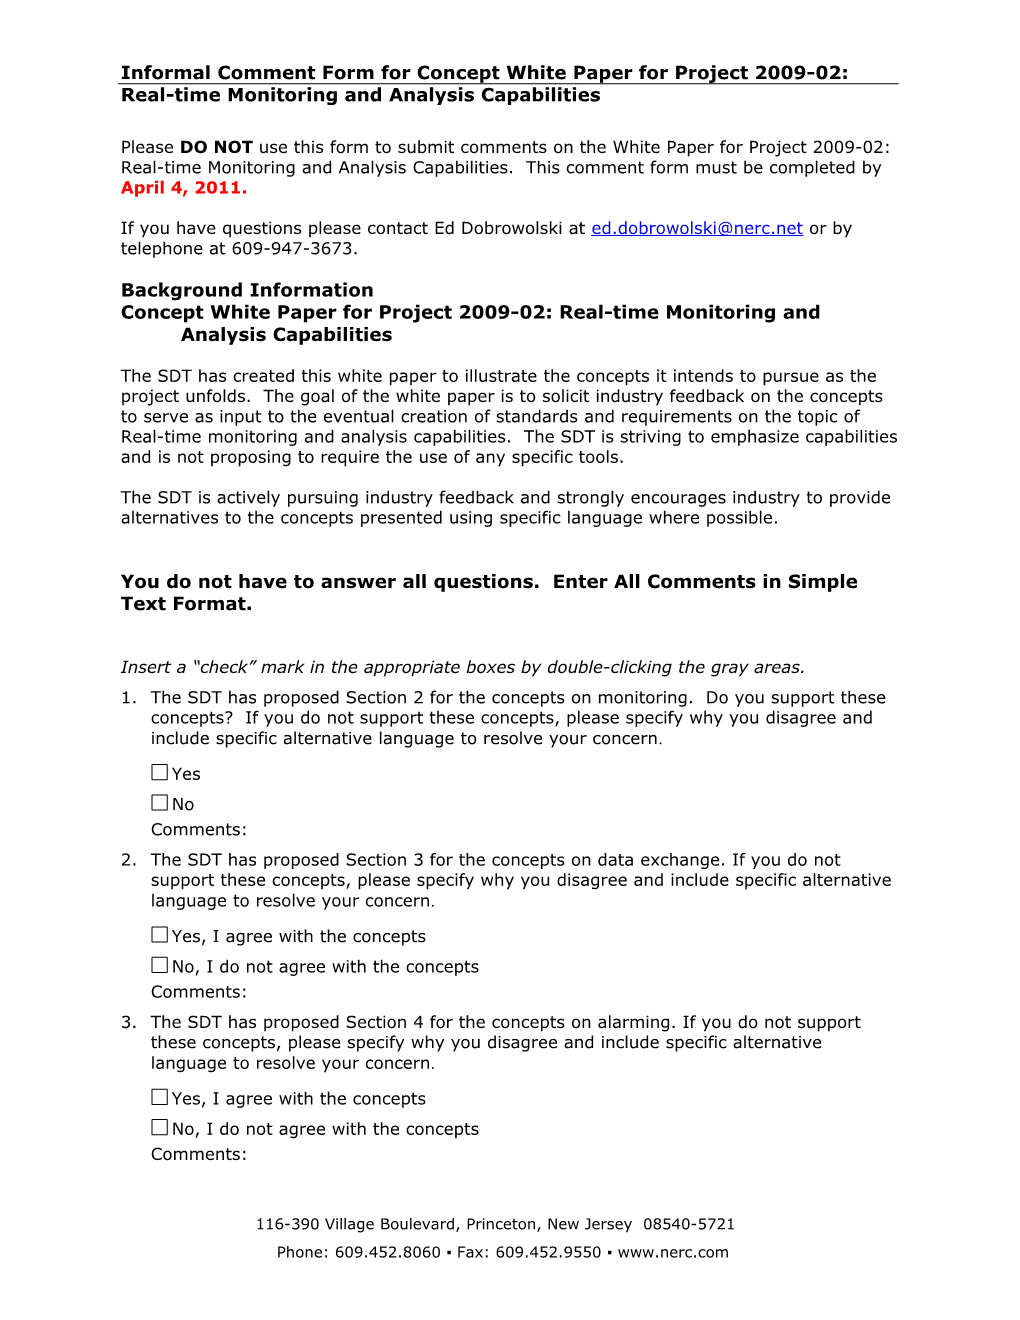 Informal Comment Form Forconcept White Paper for Project 2009-02: Real-Time Monitoring